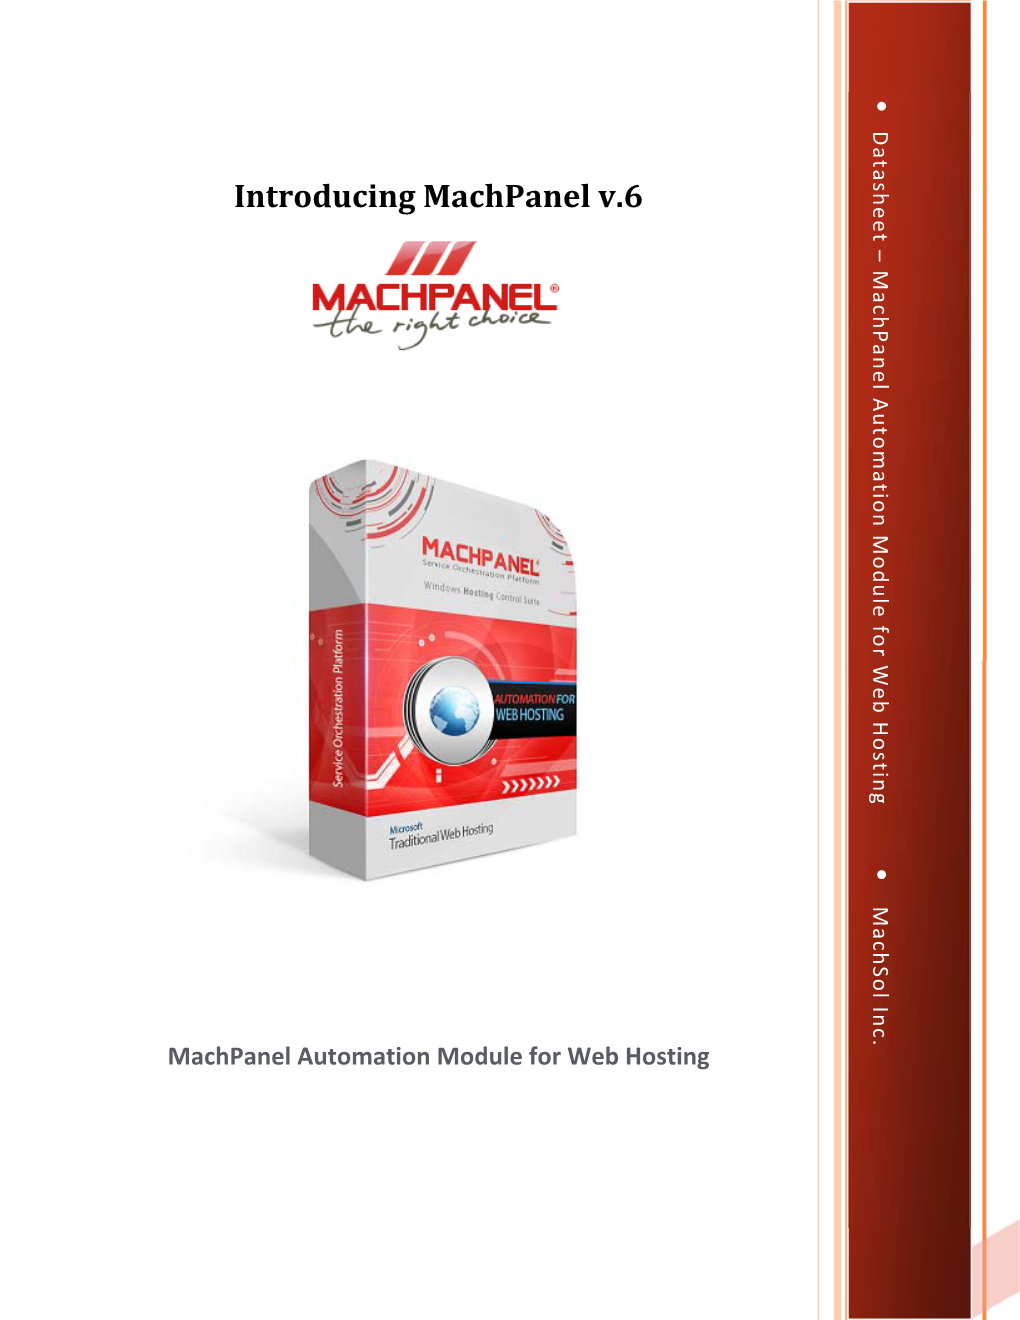 4. What Is Machpanel Automation Module for Web Hosting?